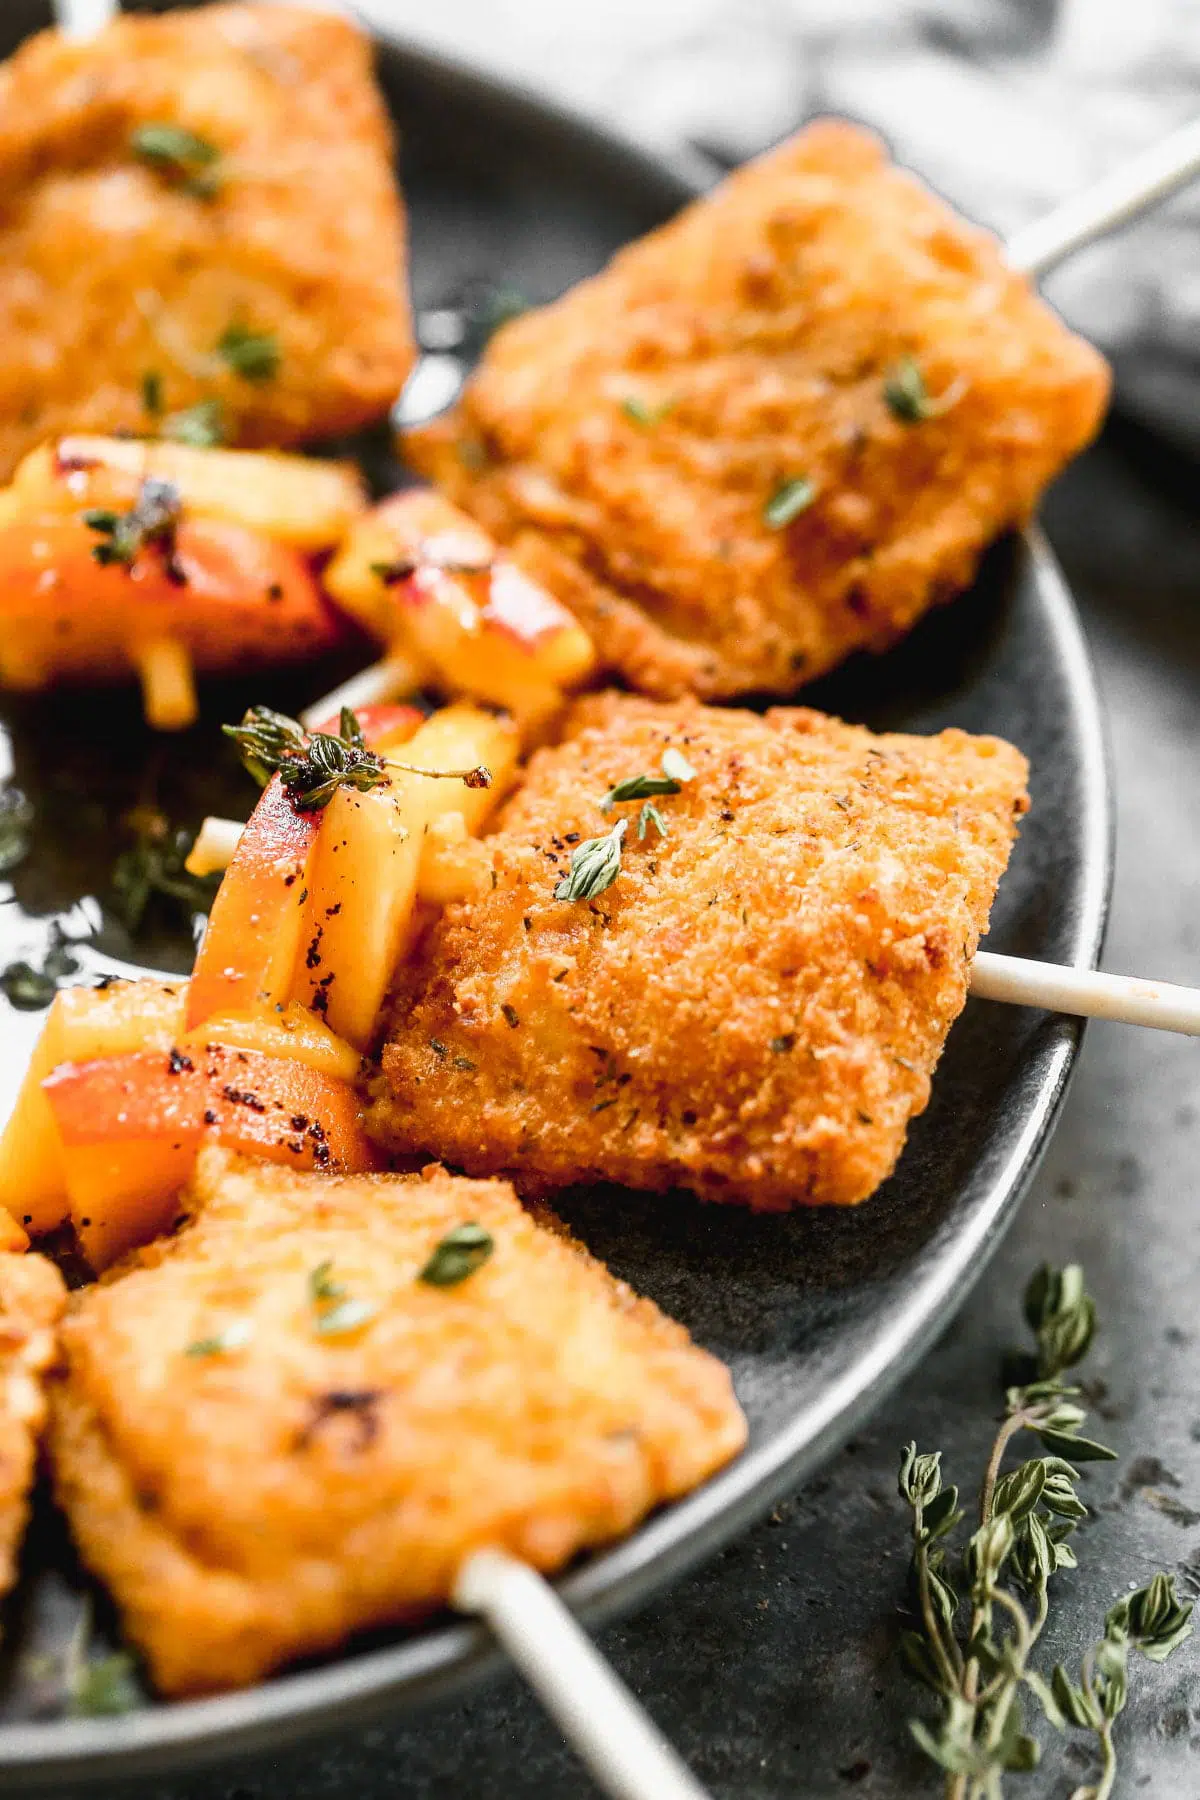 Cocktail hour just got infinitely easier and more delicious with our Peach Toasted Ravioli Pops. We throw crispy ravioli on a cocktail stick with the ripest summer peaches, drizzle each one with brown butter and thyme infused honey and serve it up with our favoirte chilled rose.